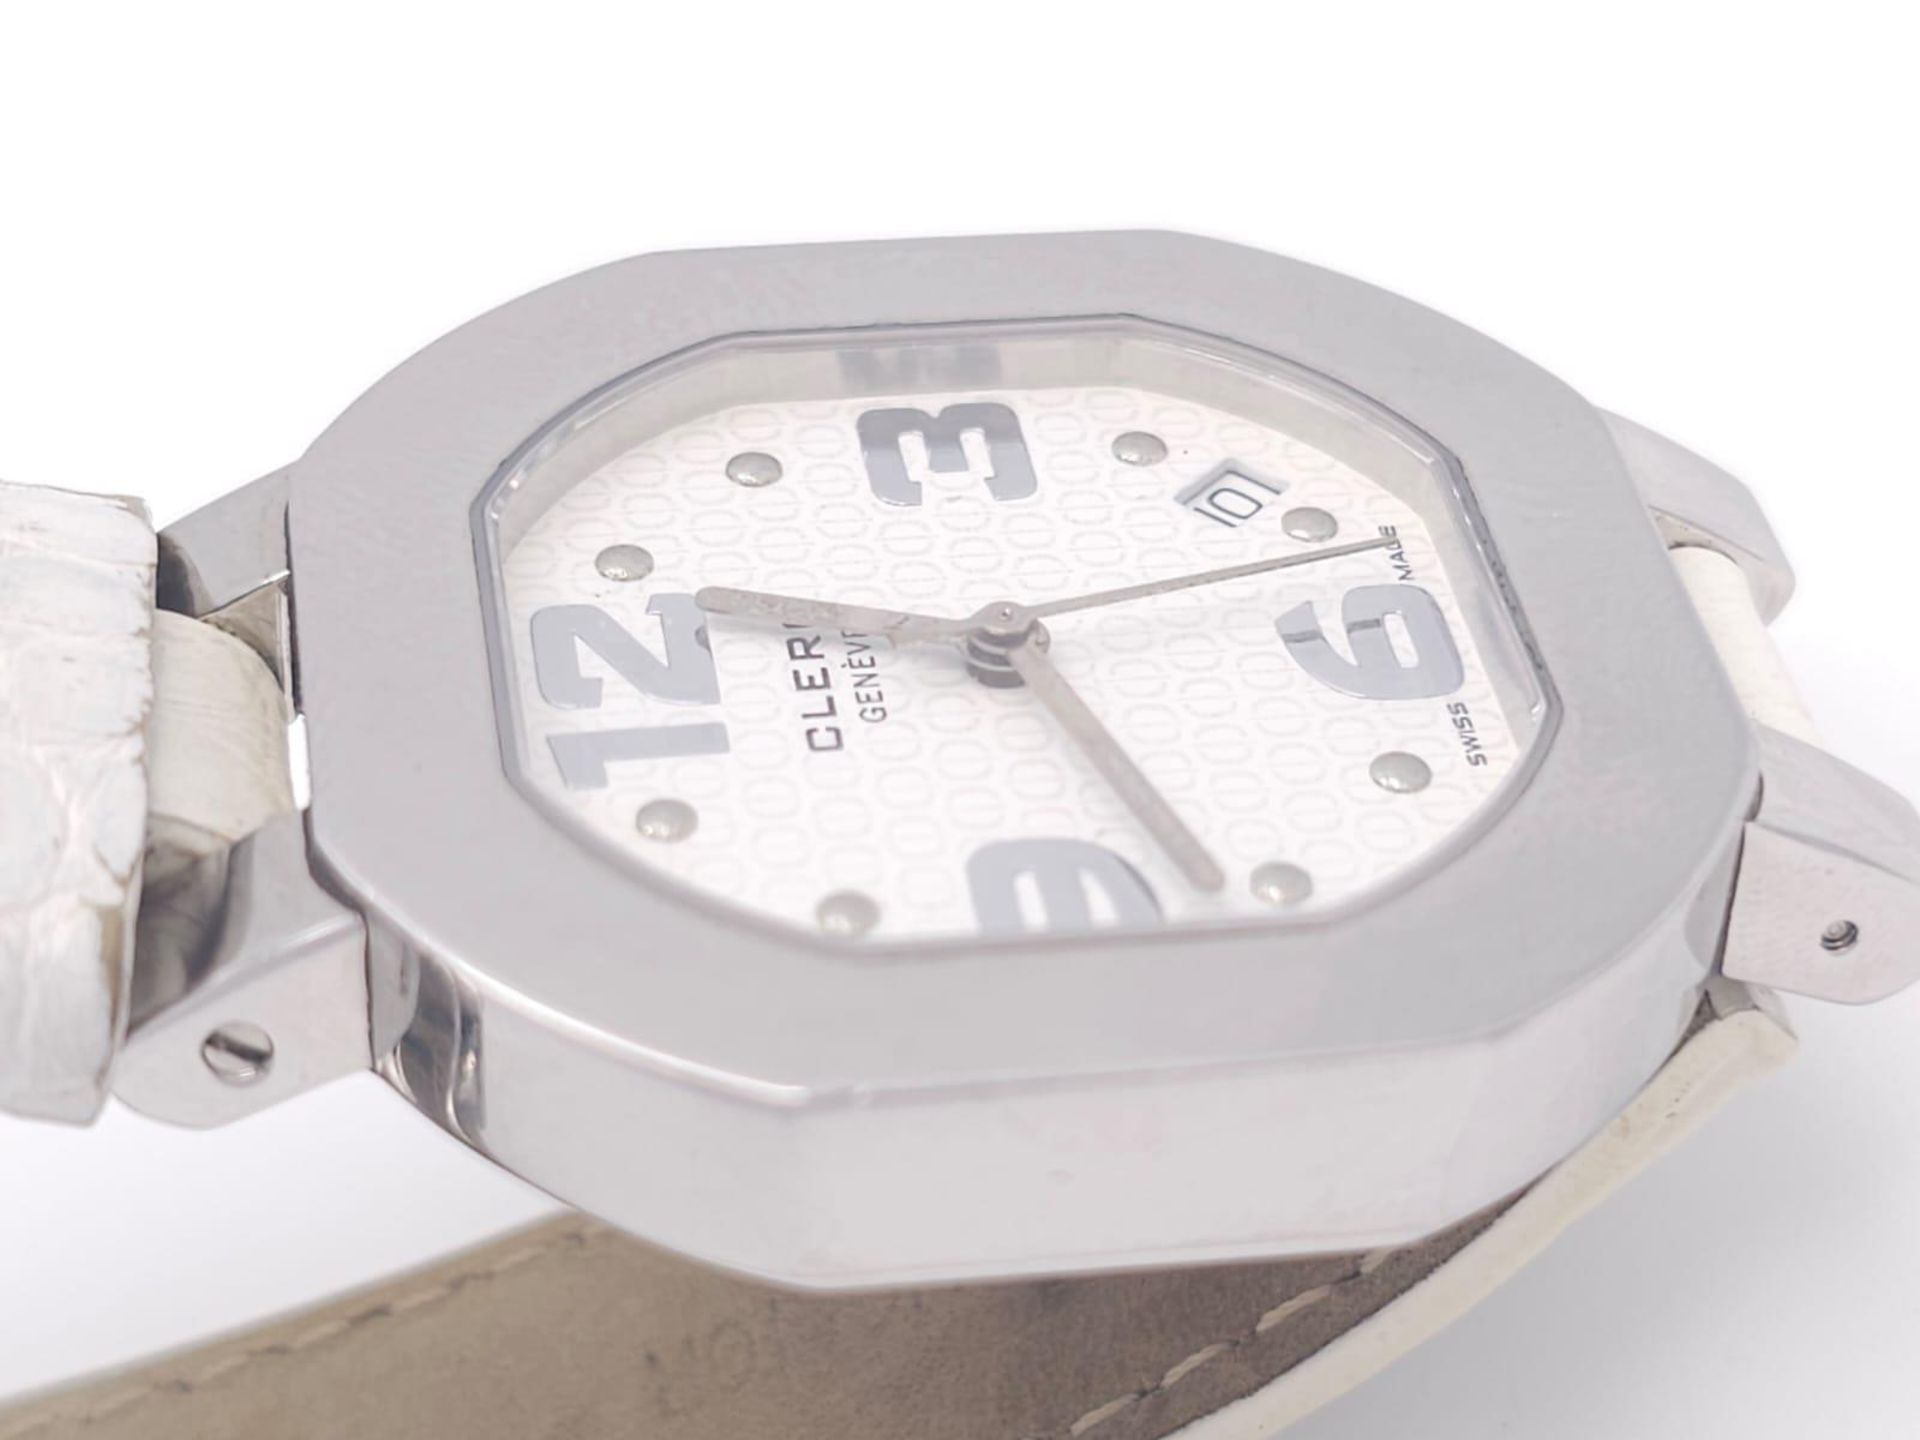 A Clerc C-One Designer Swiss Quartz Gents Watch. White leather strap. Stainless steel case - 36mm. - Image 3 of 10